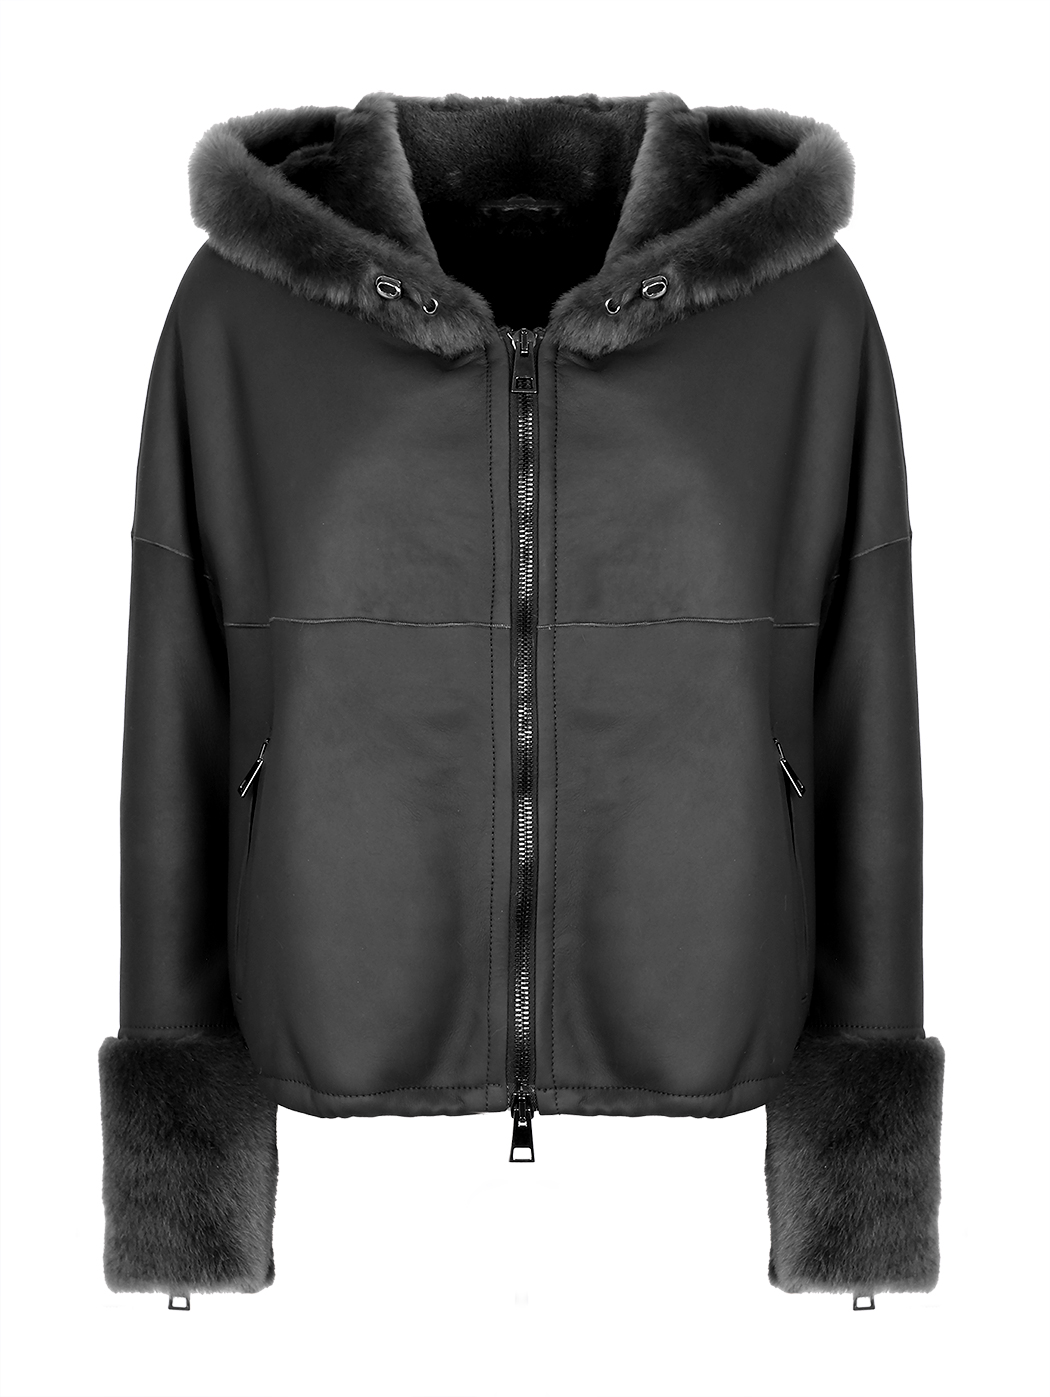 Hooded Double-faced One Size Shearling Jacket Black